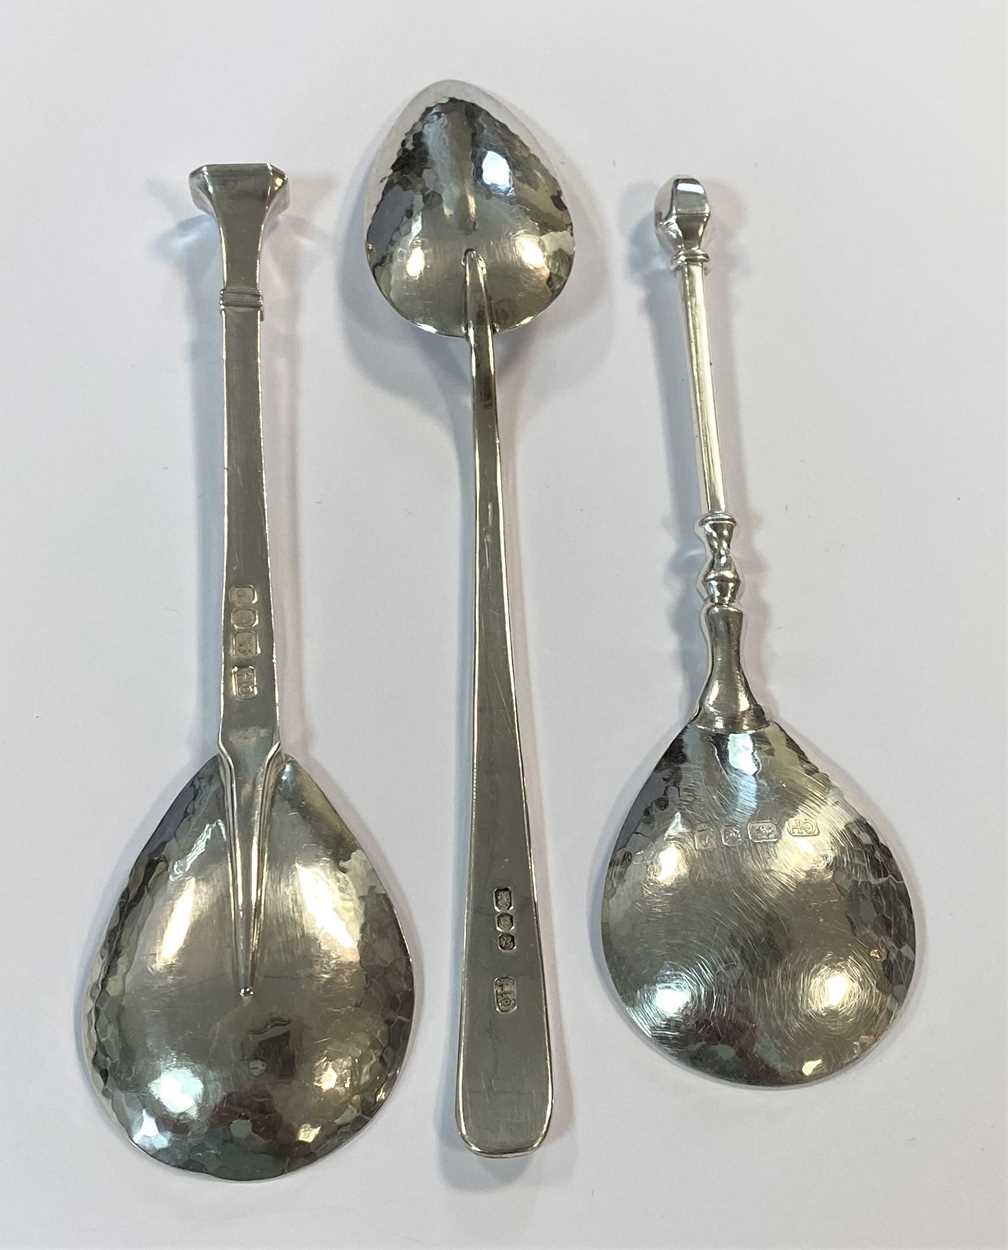 Three 20th century silver conserve spoons, mark of Guild of Handicraft, - Image 3 of 6